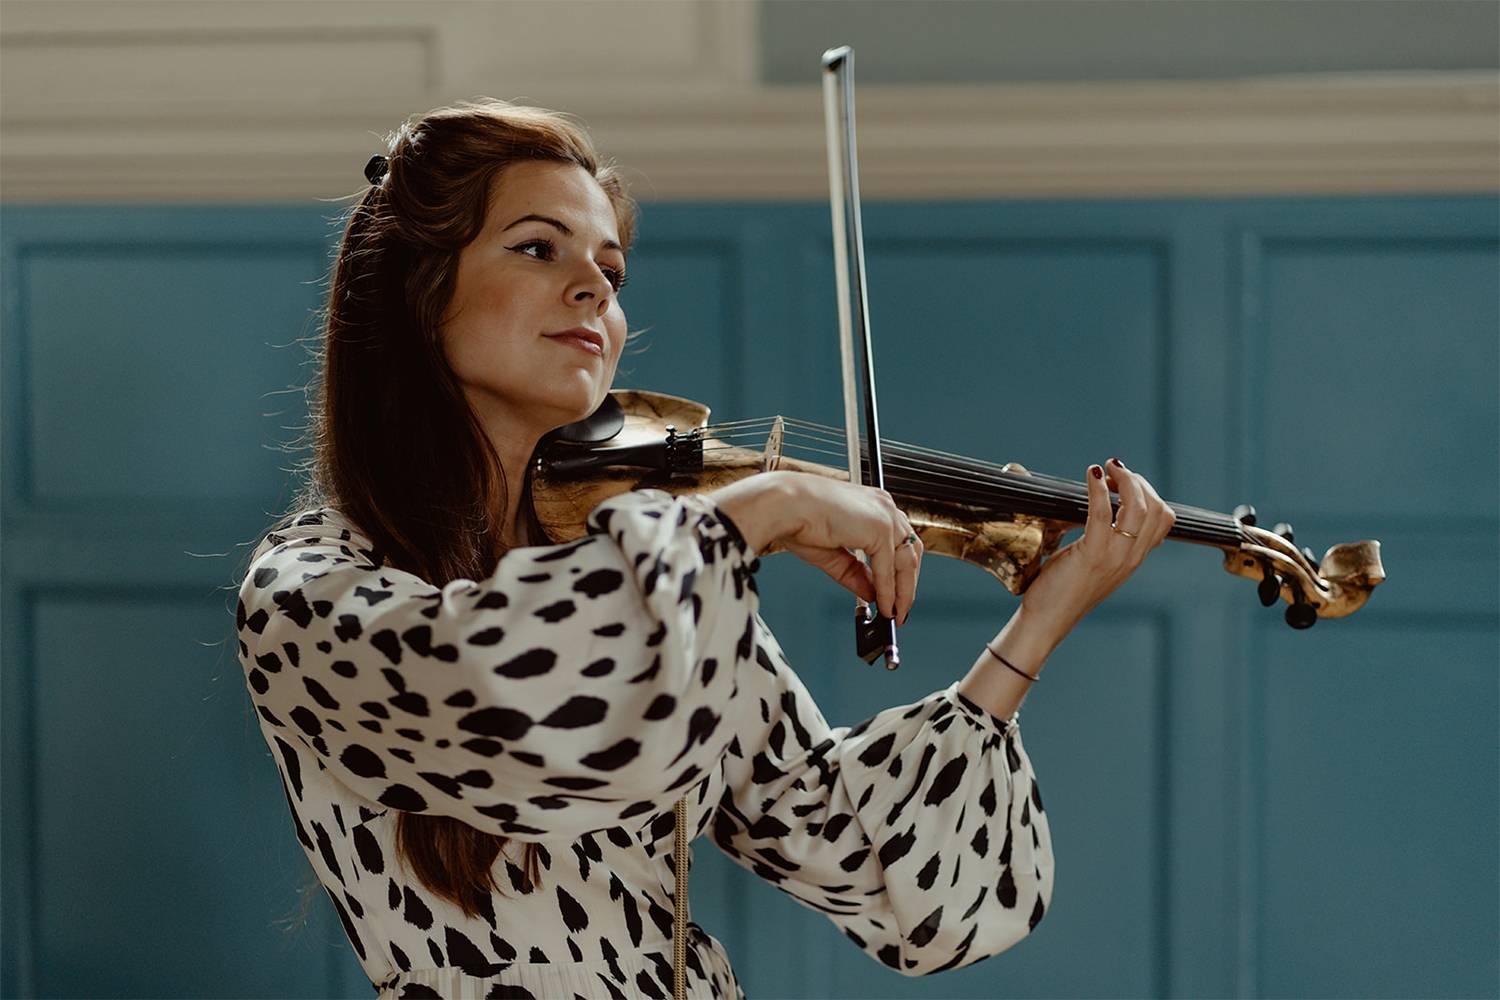 Classical and Contemporary Electric Violinist in London